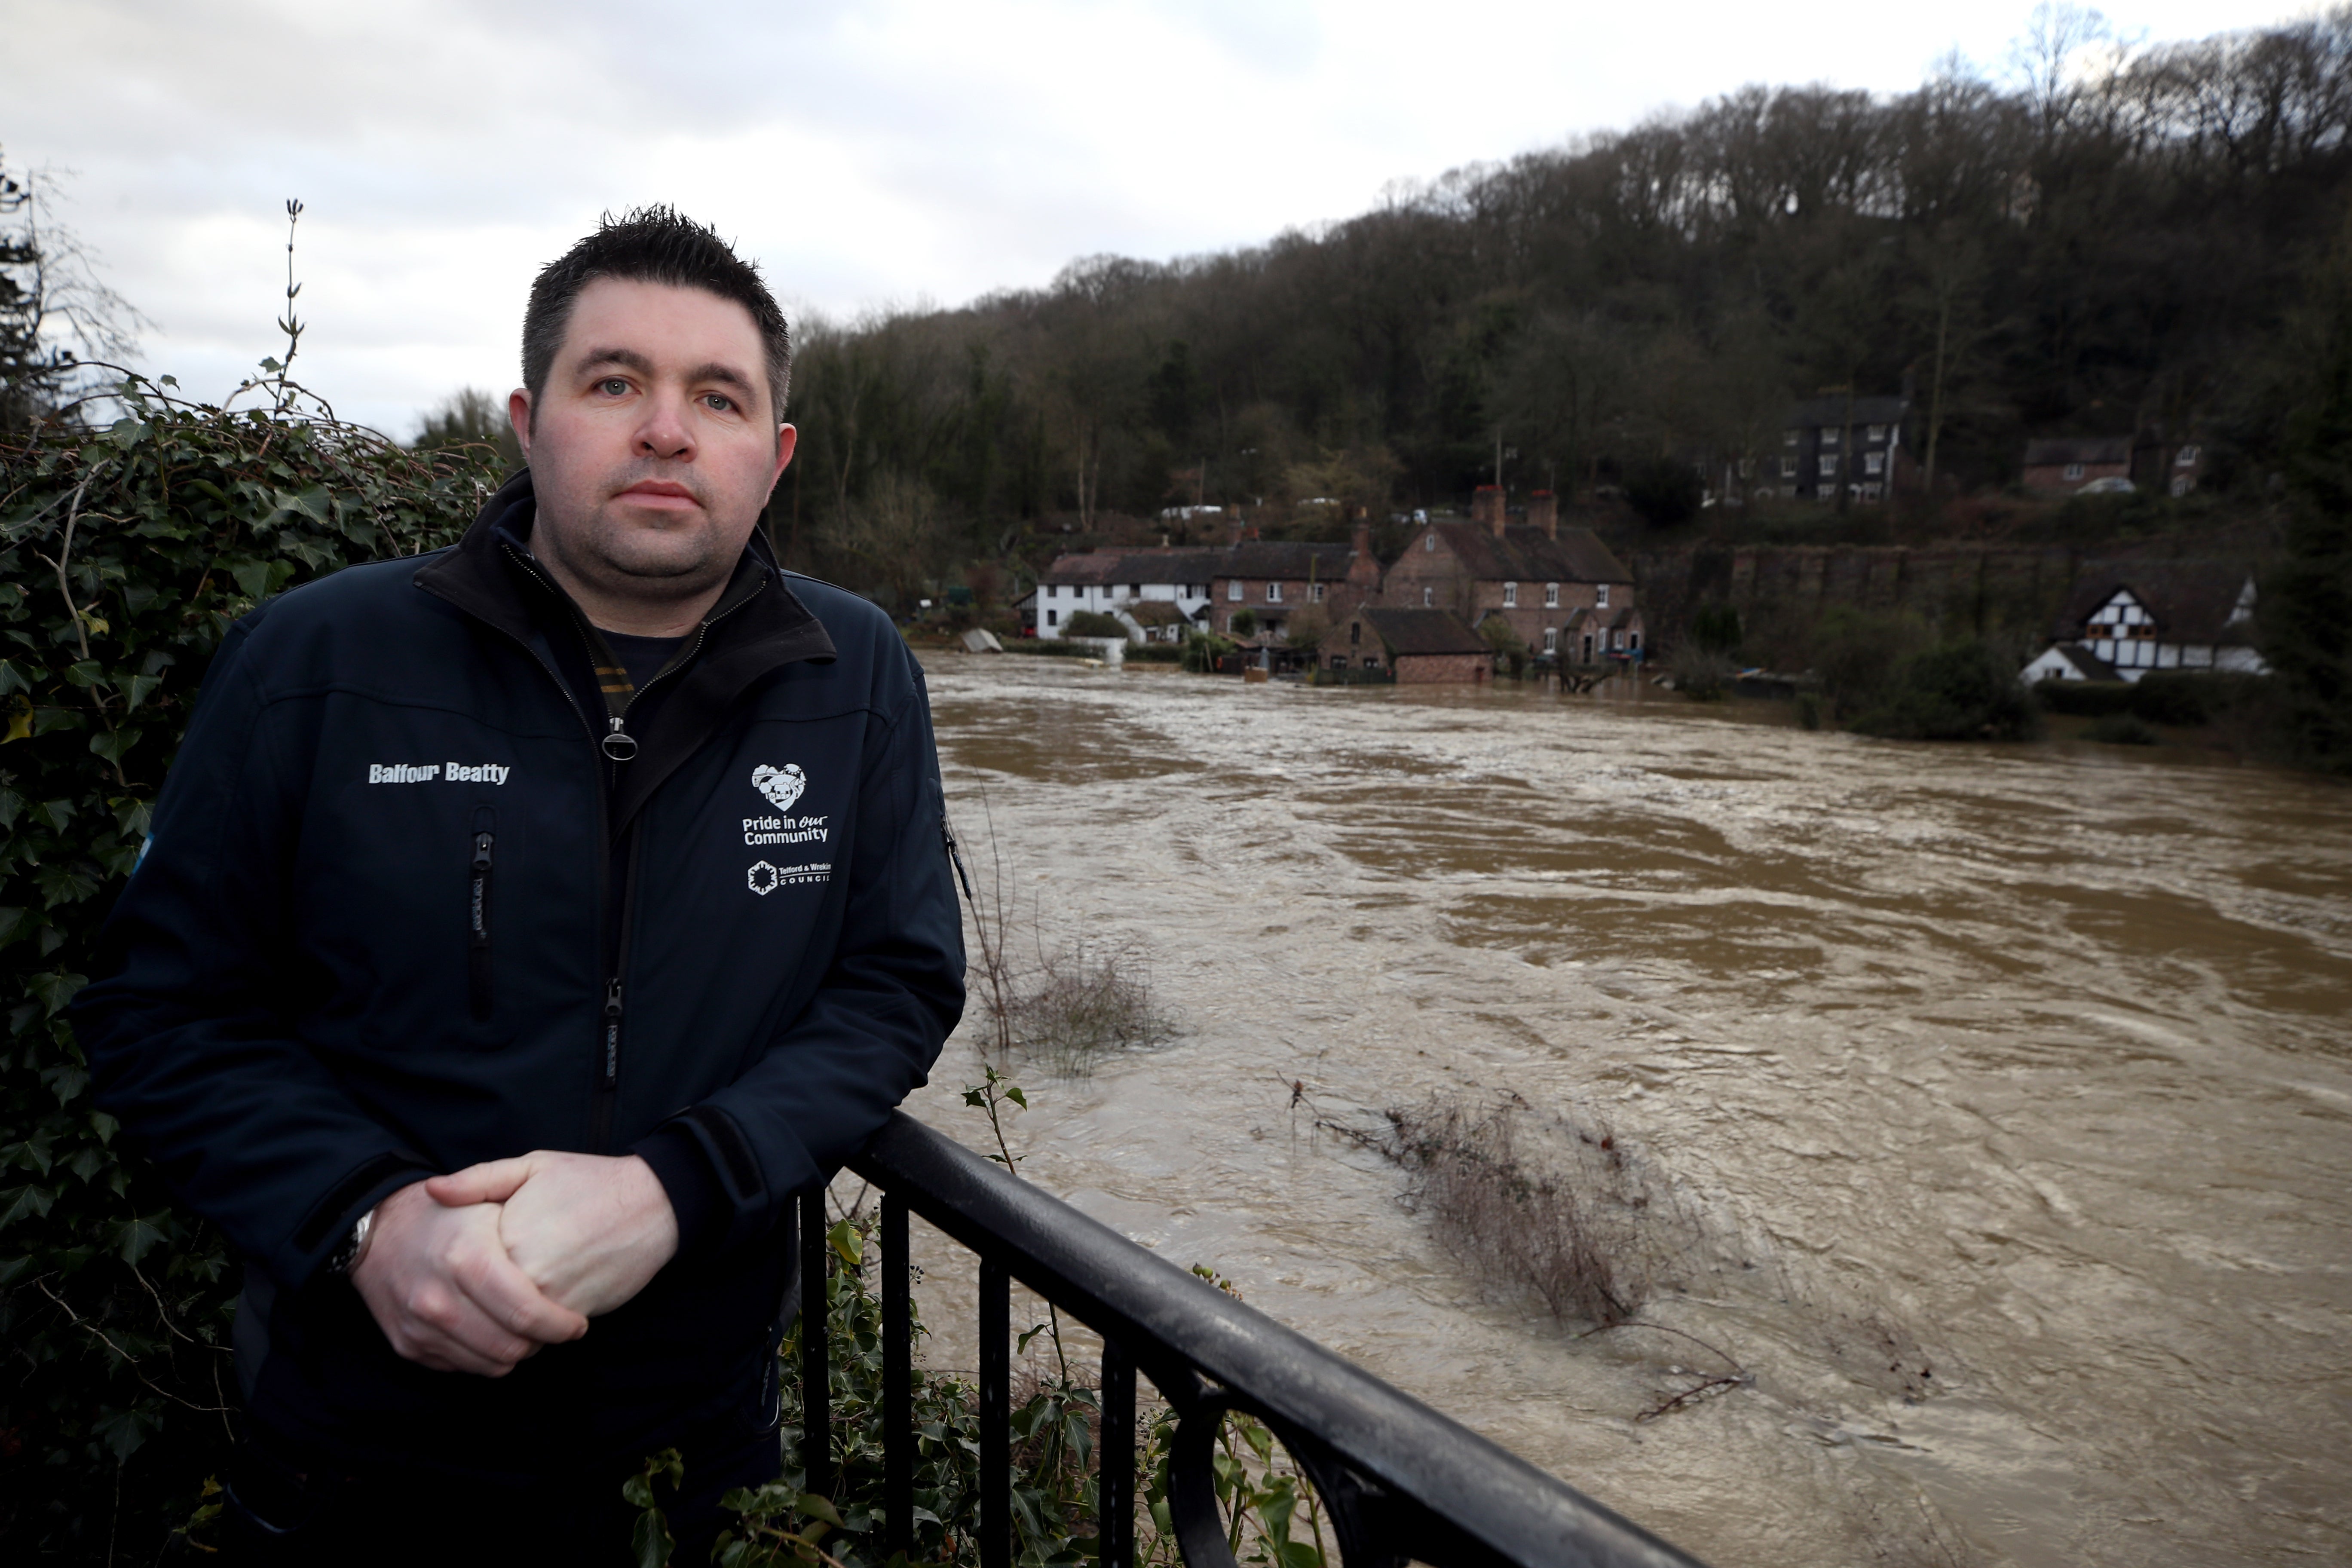 Telford and Wrekin councillor Shaun Davies near the River Severn following high winds and wet weather in Ironbridge, Shropshire